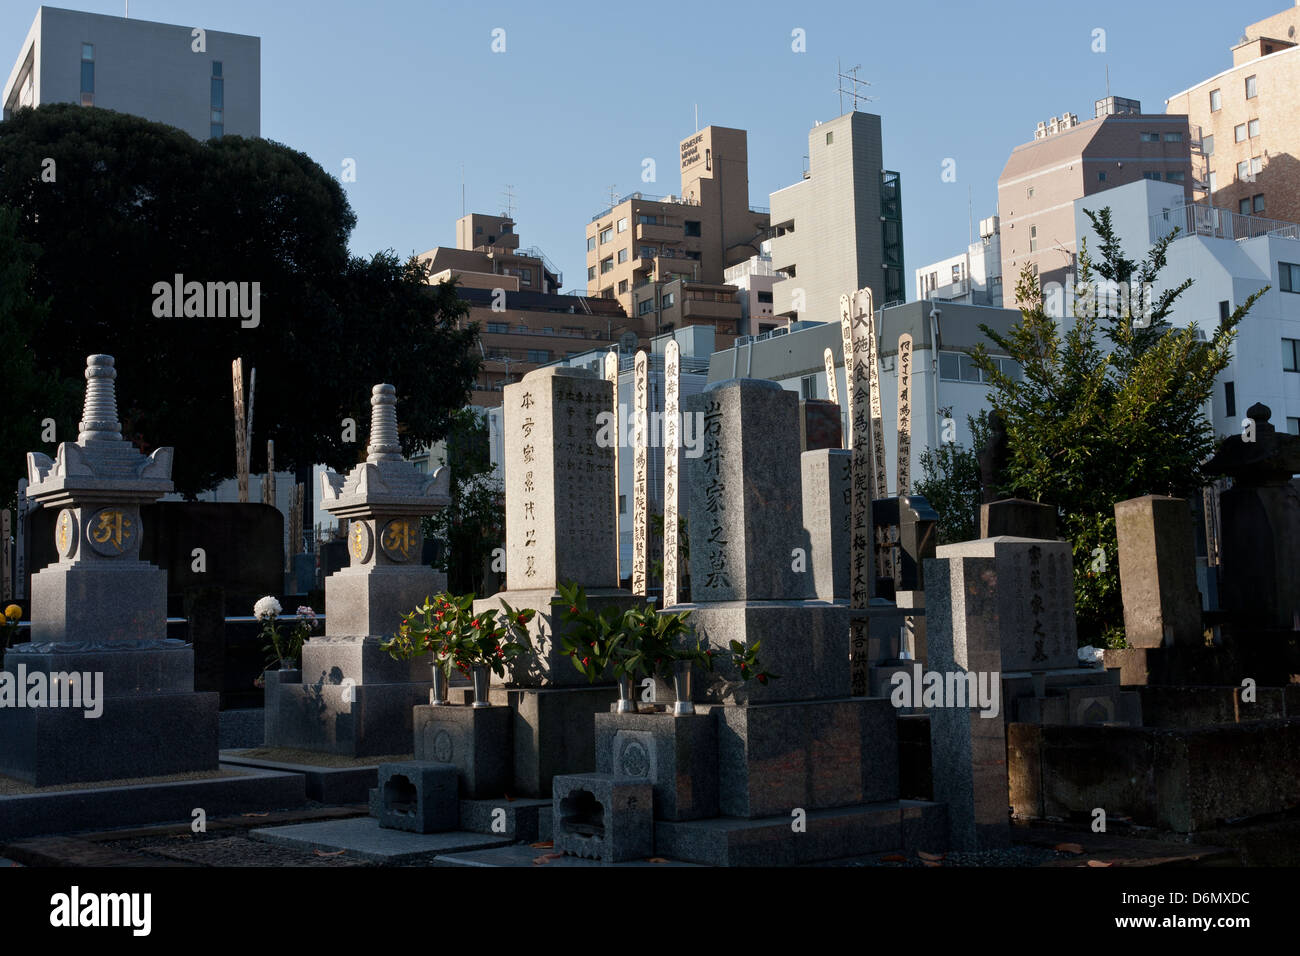 Japanese graves in Aoyama cemetery, Tokyo, Japan Stock Photo